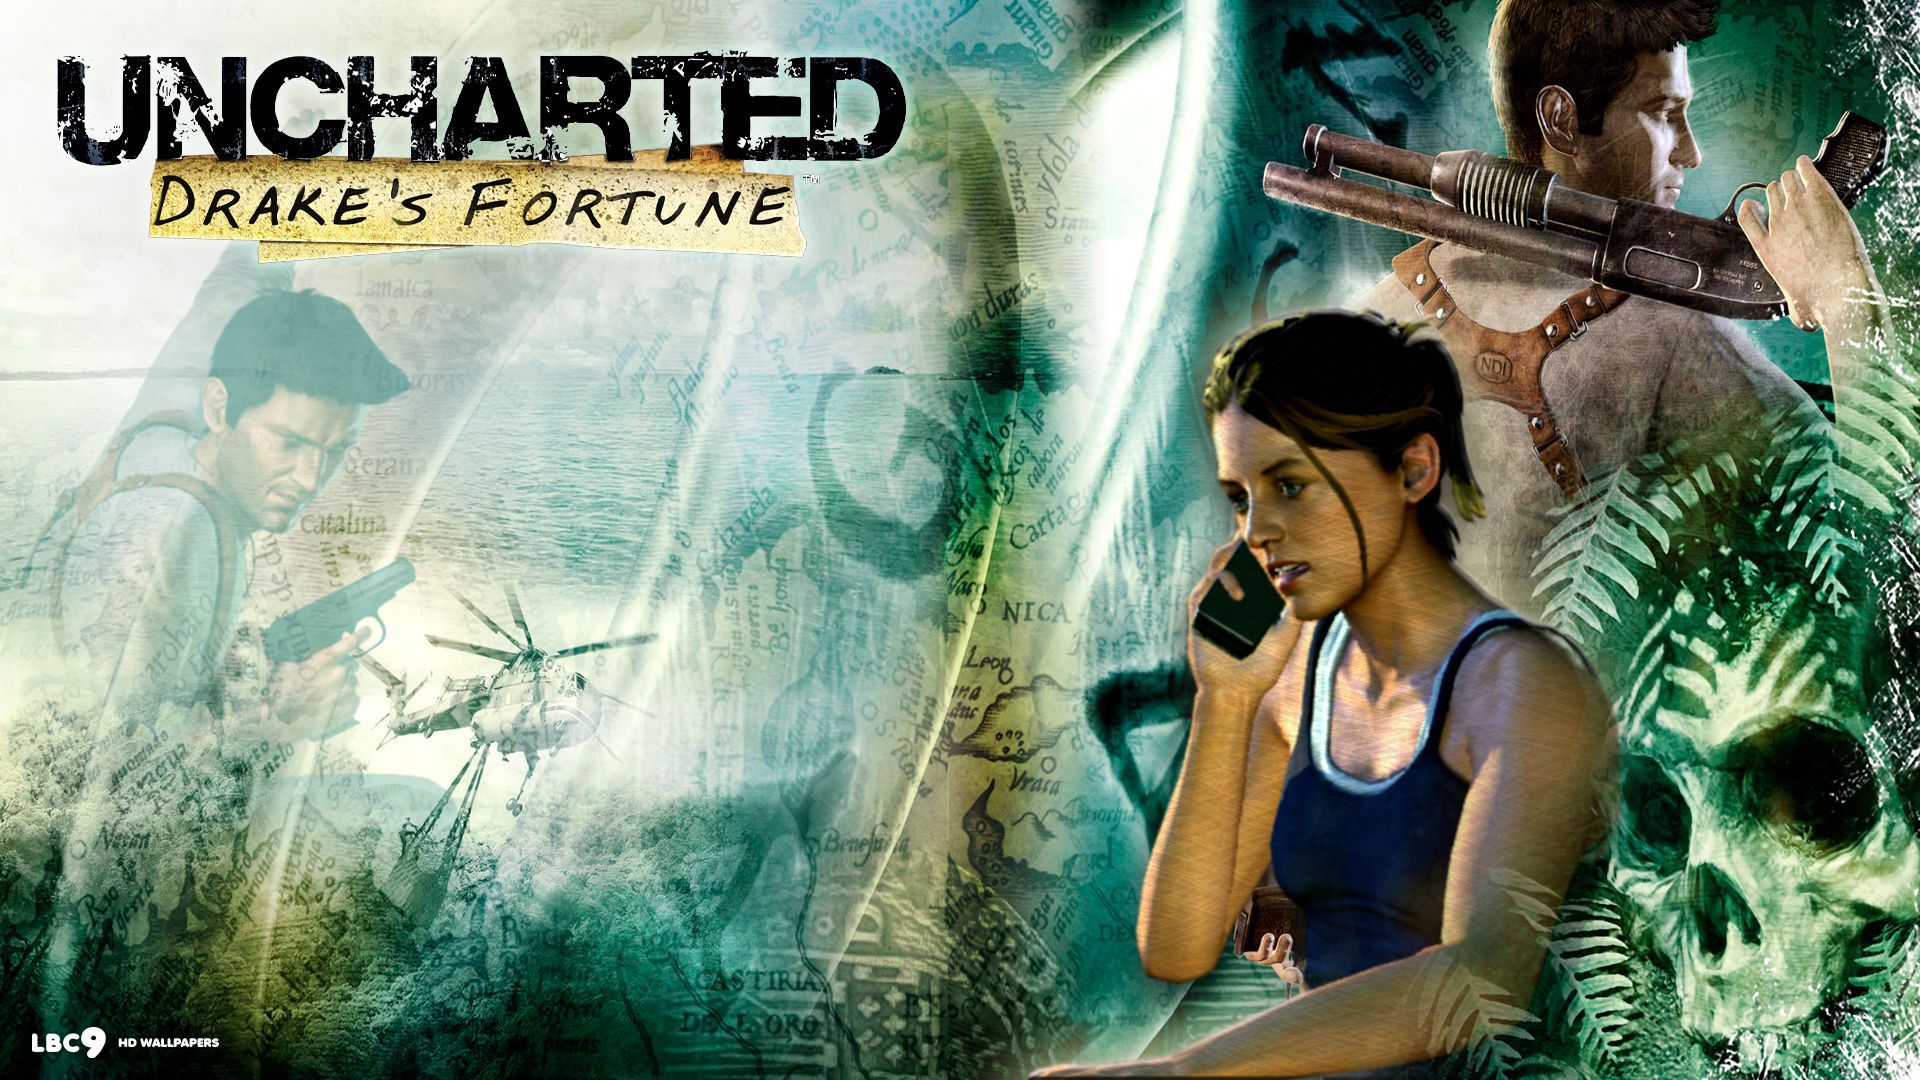 Uncharted: Drake's Fortune wallpaper, Video Game, HQ Uncharted: Drake's Fortune pictureK Wallpaper 2019